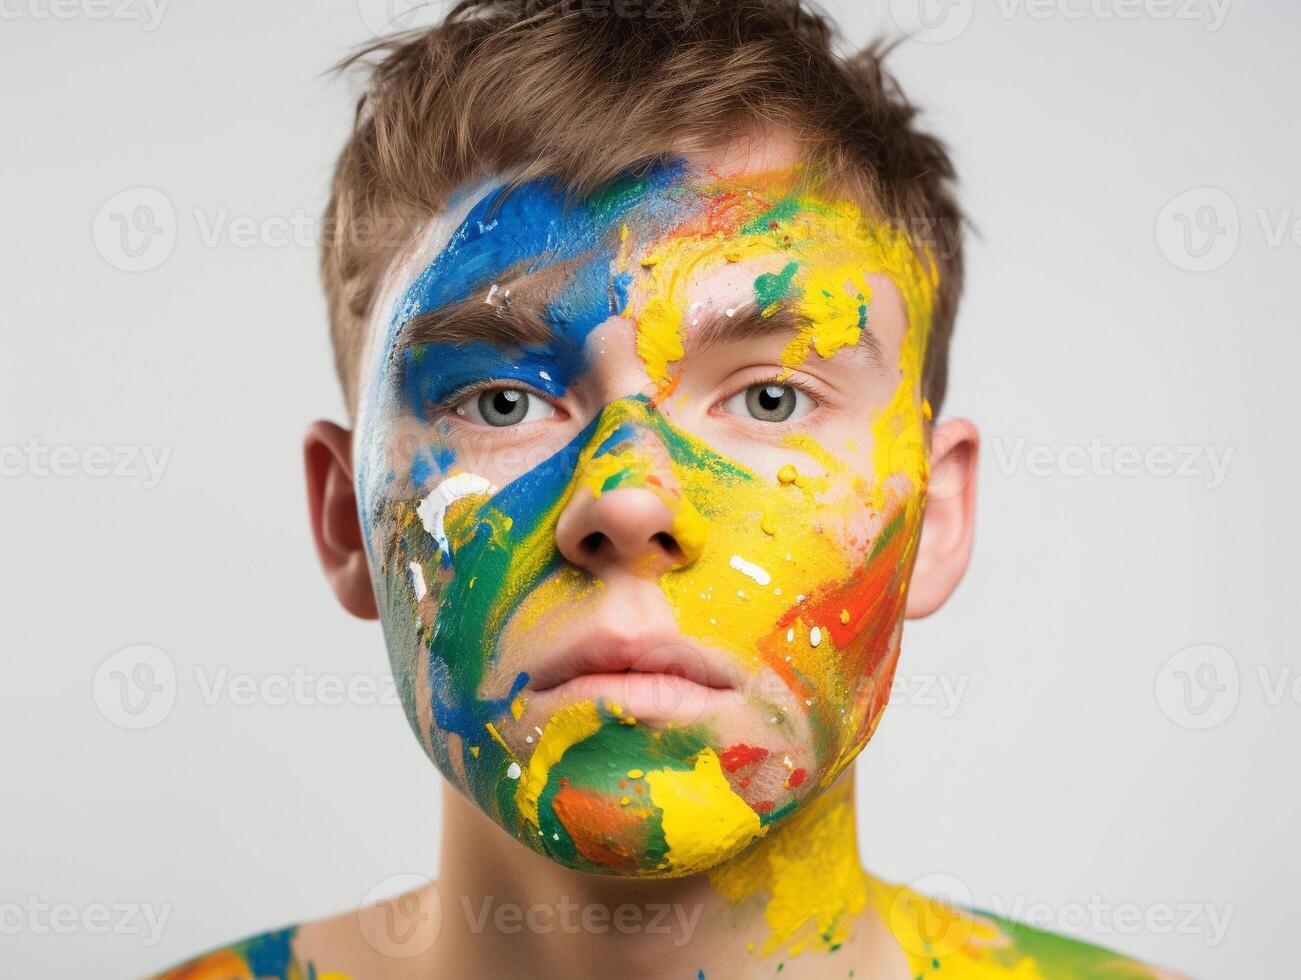 A man paints his face created with photo